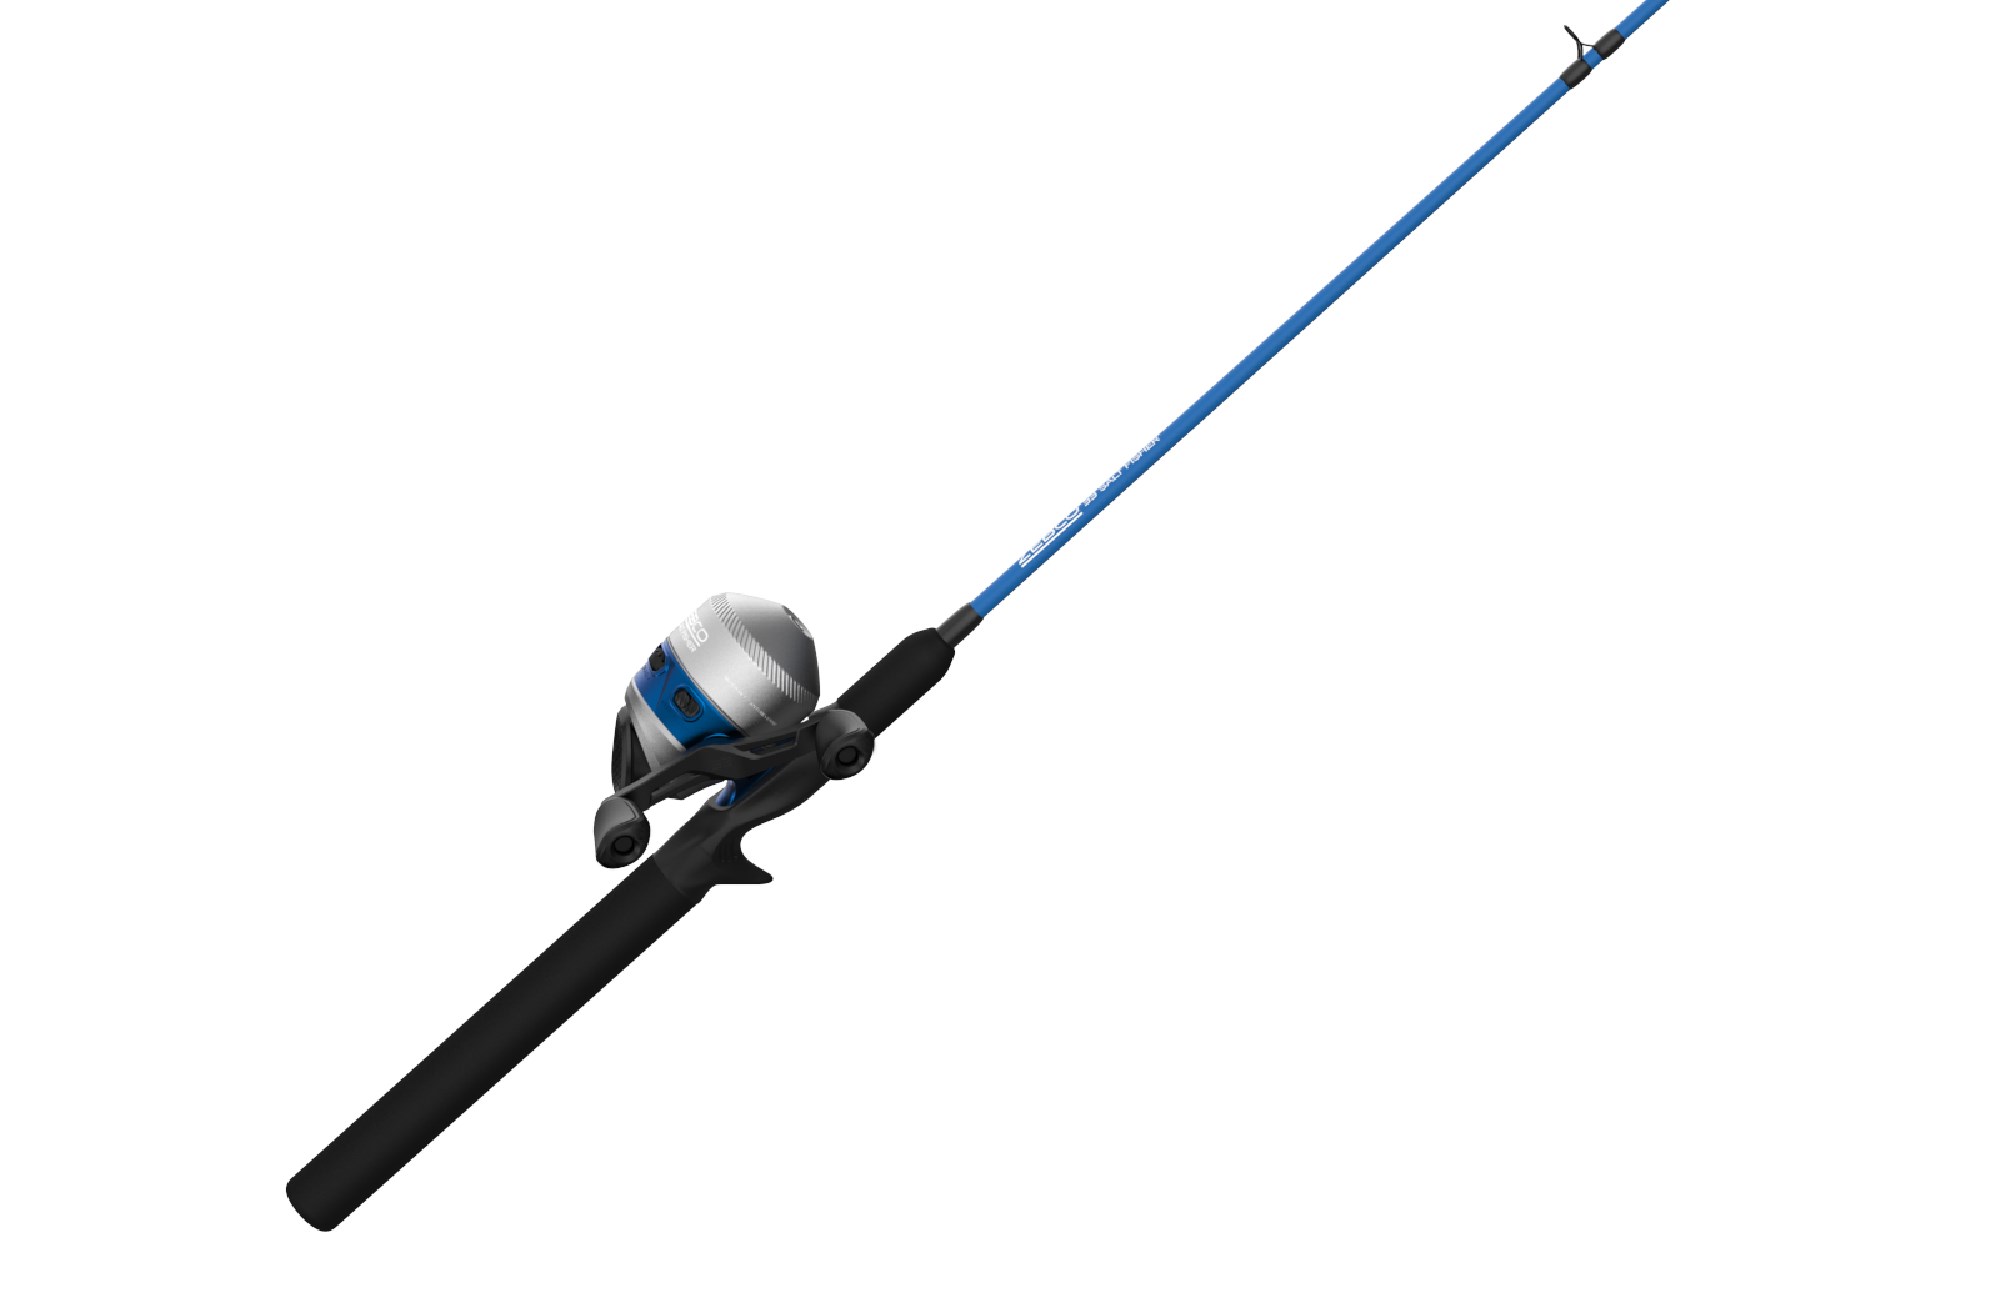 https://cs1.0ps.us/original/opplanet-zebco-salt-fisher-spincast-combo-rod-6ft-6in-moderate-fast-medium-heavy-2-piecces-sf33n662mh-ns3-main